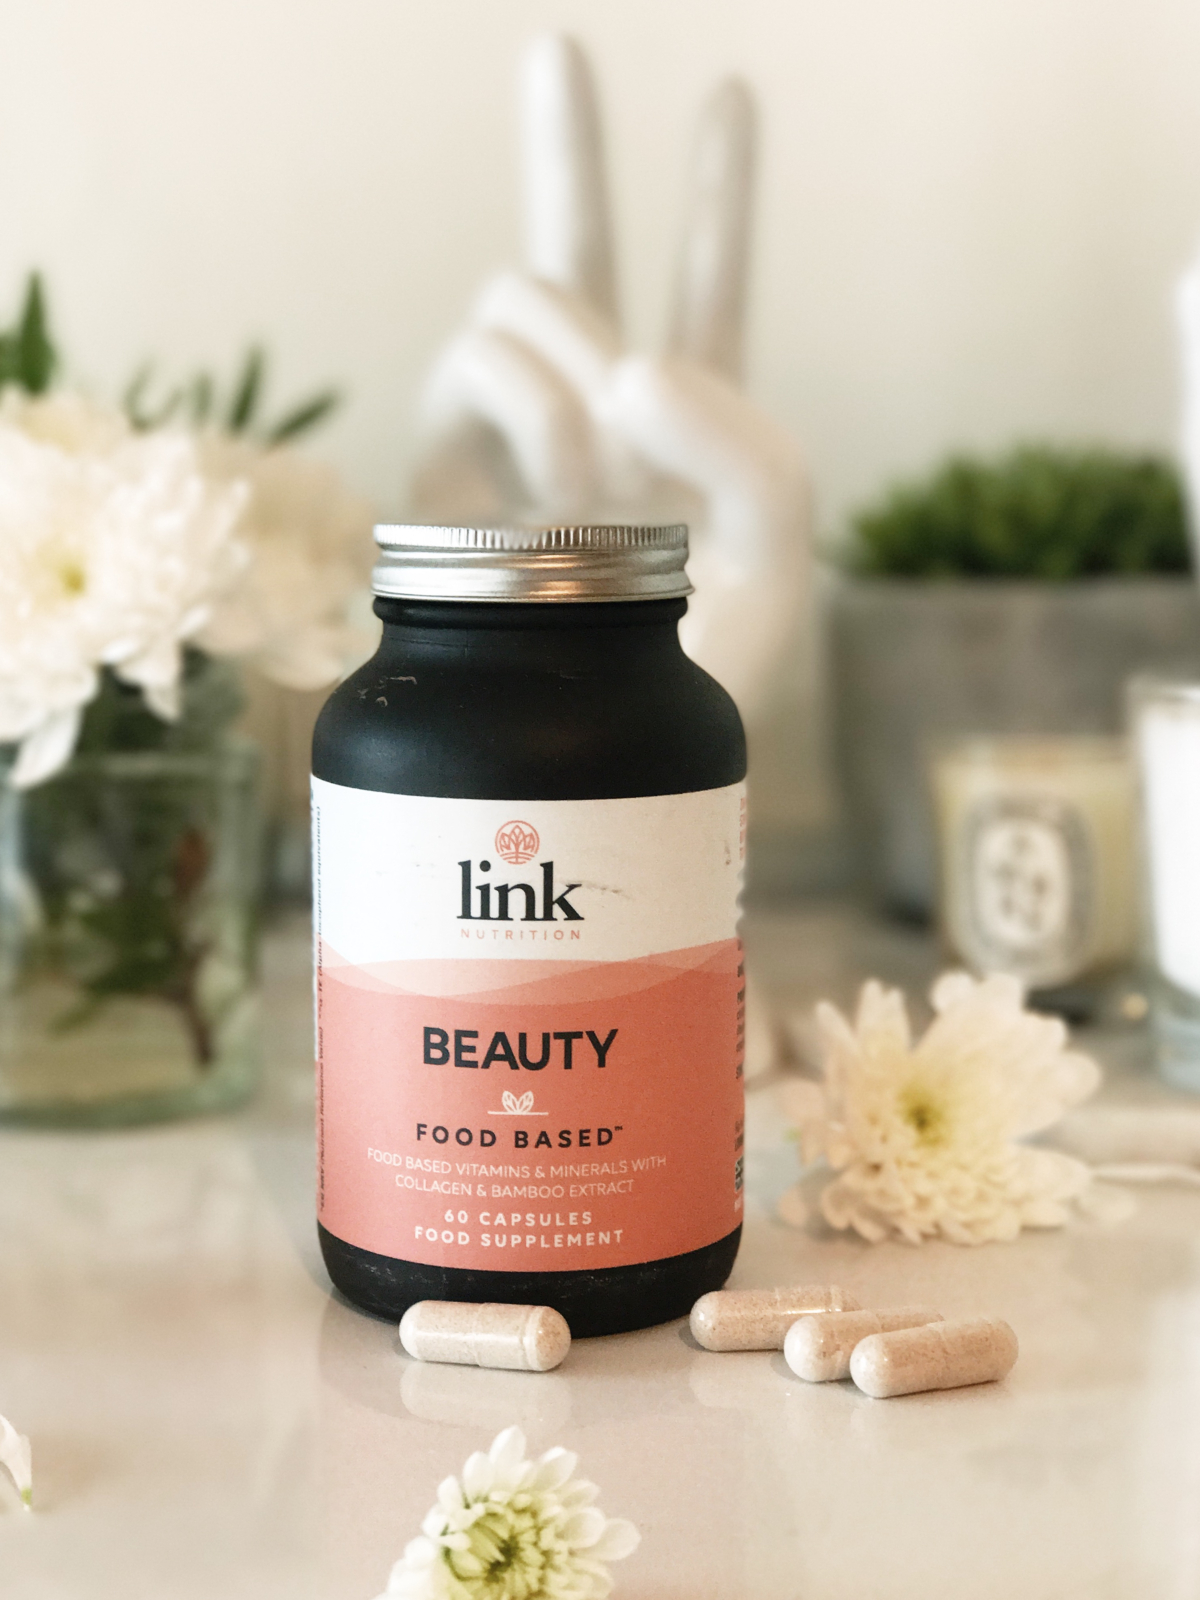 Link Nutrition Beauty Food Based Supplement Review